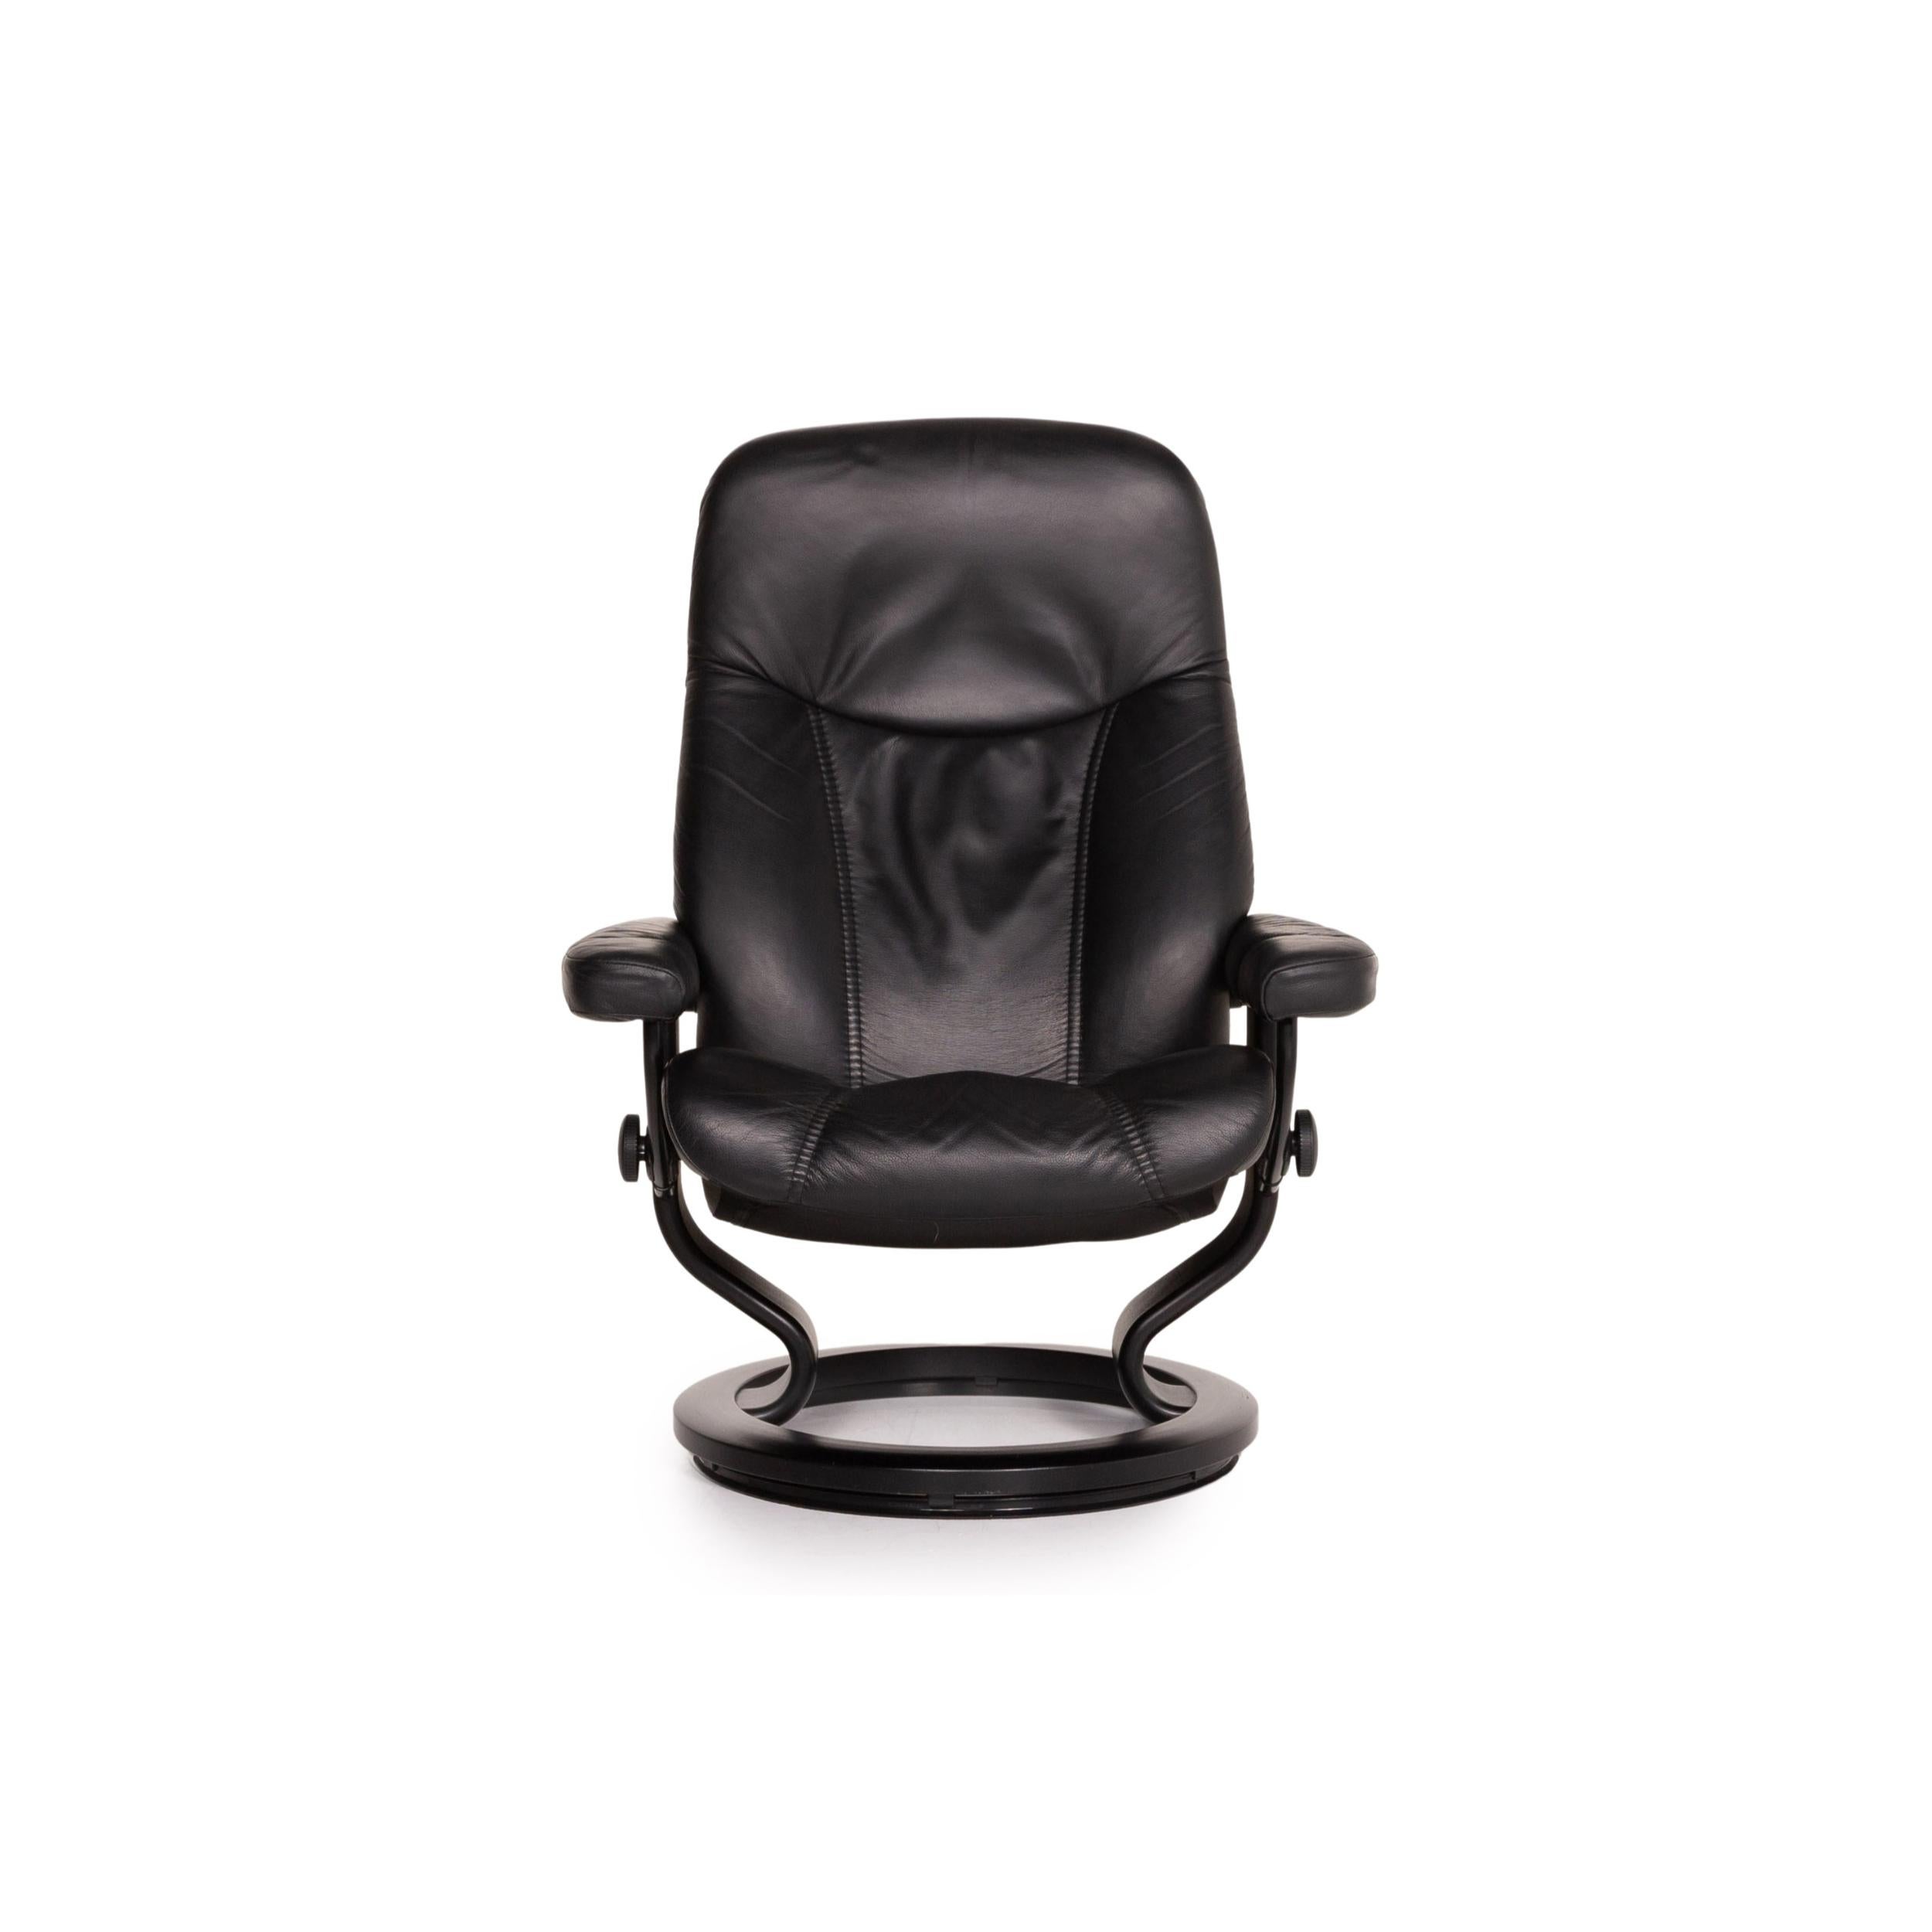 Stressless Consul Leather Armchair Incl. Stool Black Function Relaxation For Sale 3